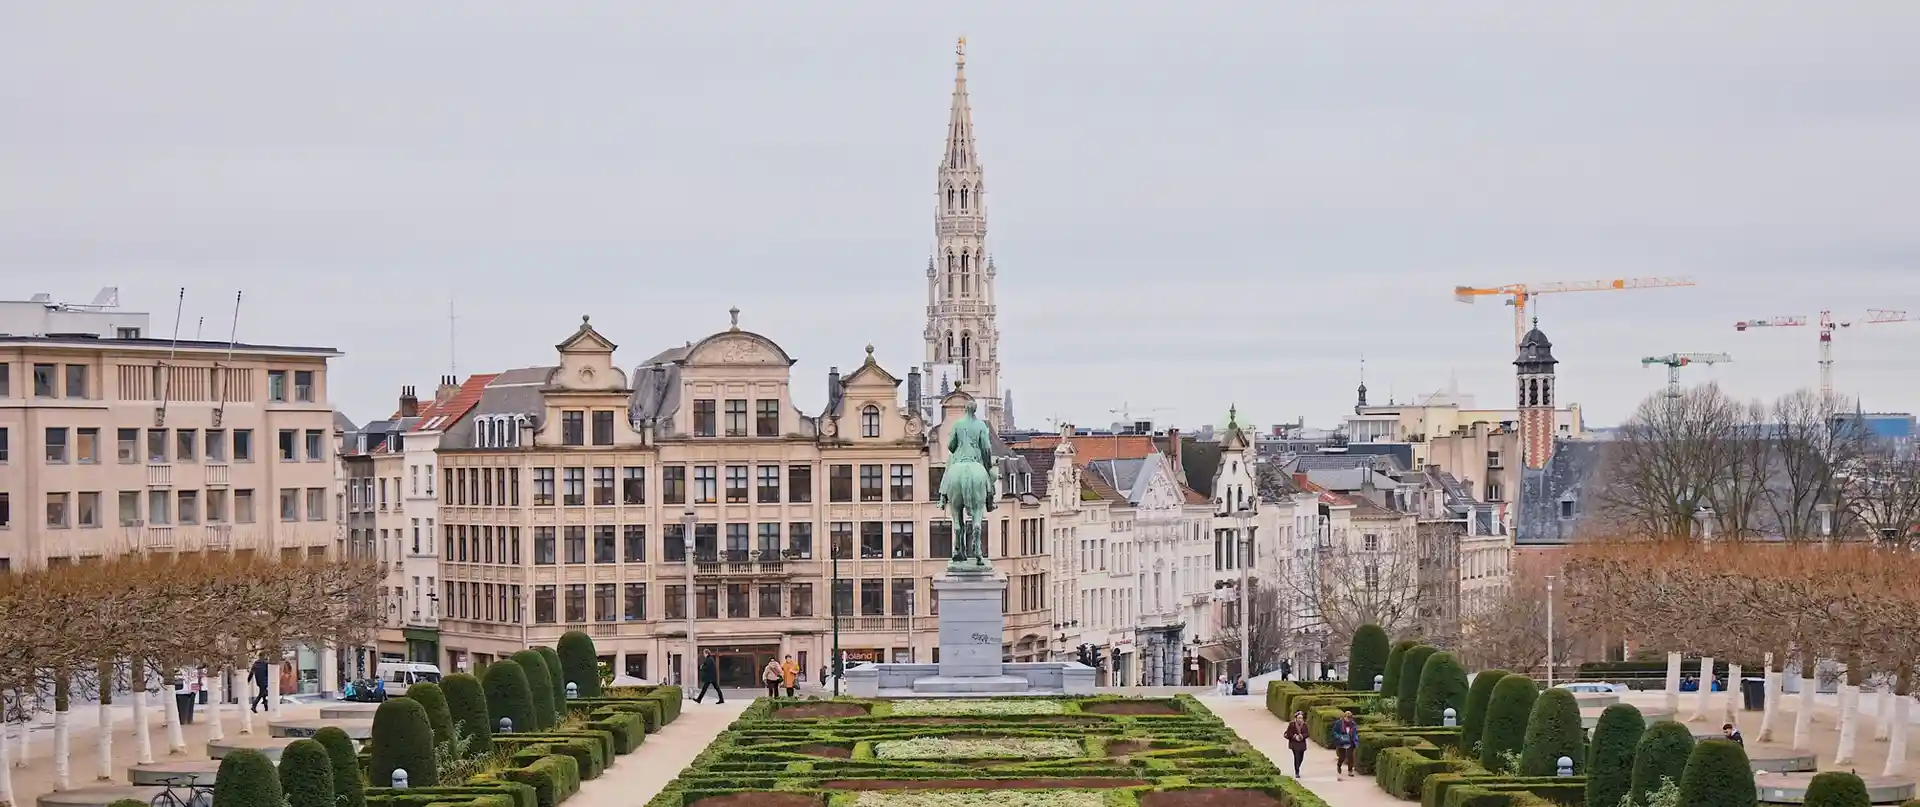 Top 5 best destinations to visit in Brussels